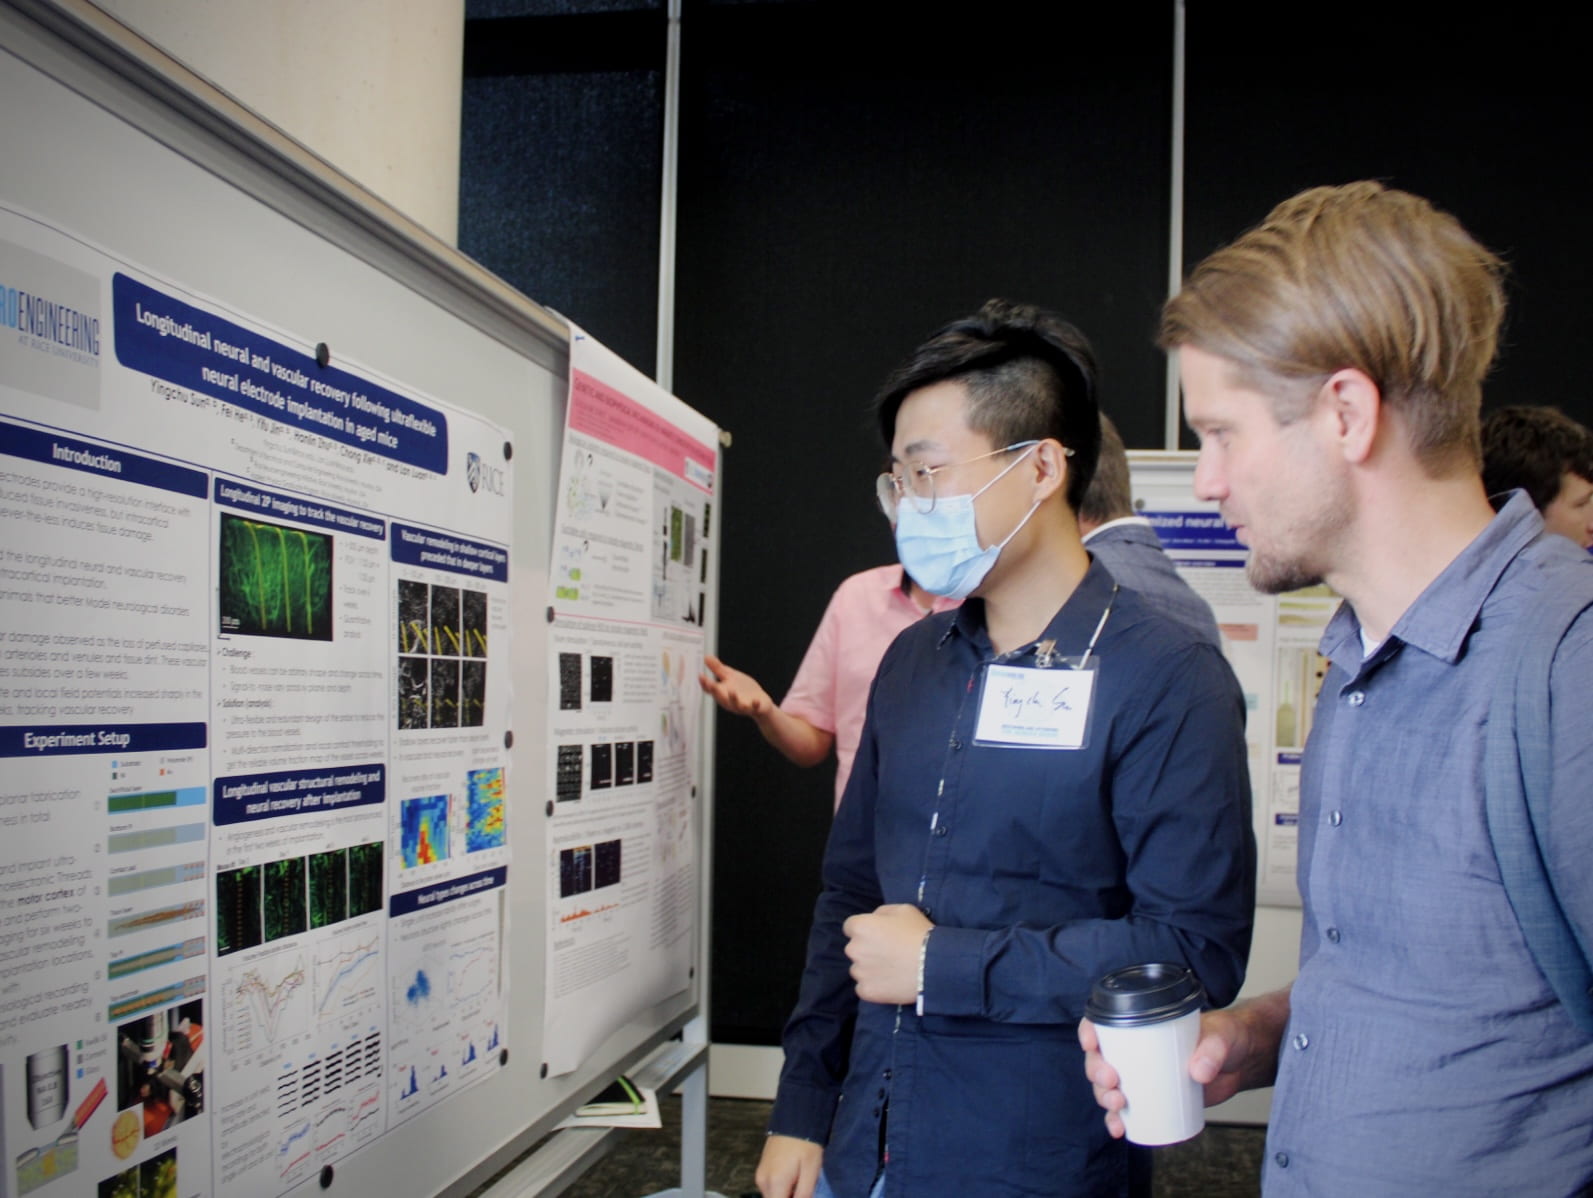 2022 poster session at Rice Neuroengineering